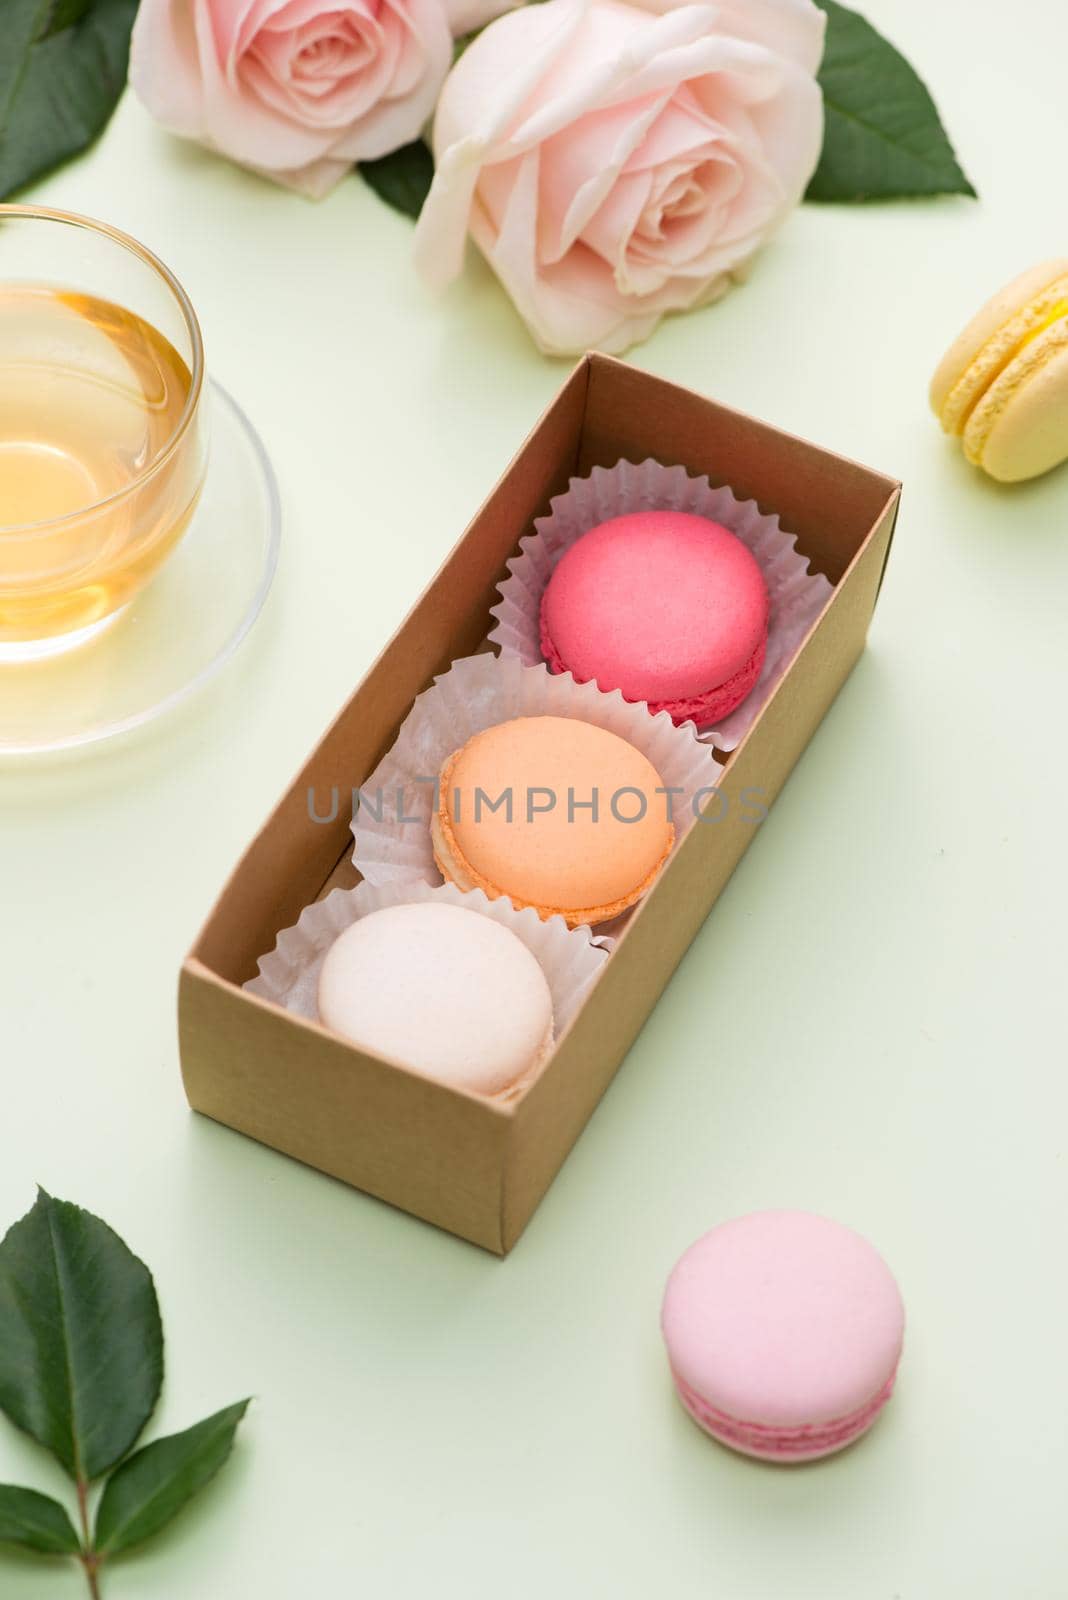 French macaroons. Many variegated sweet macarons in box with bouquet of pink roses on the table